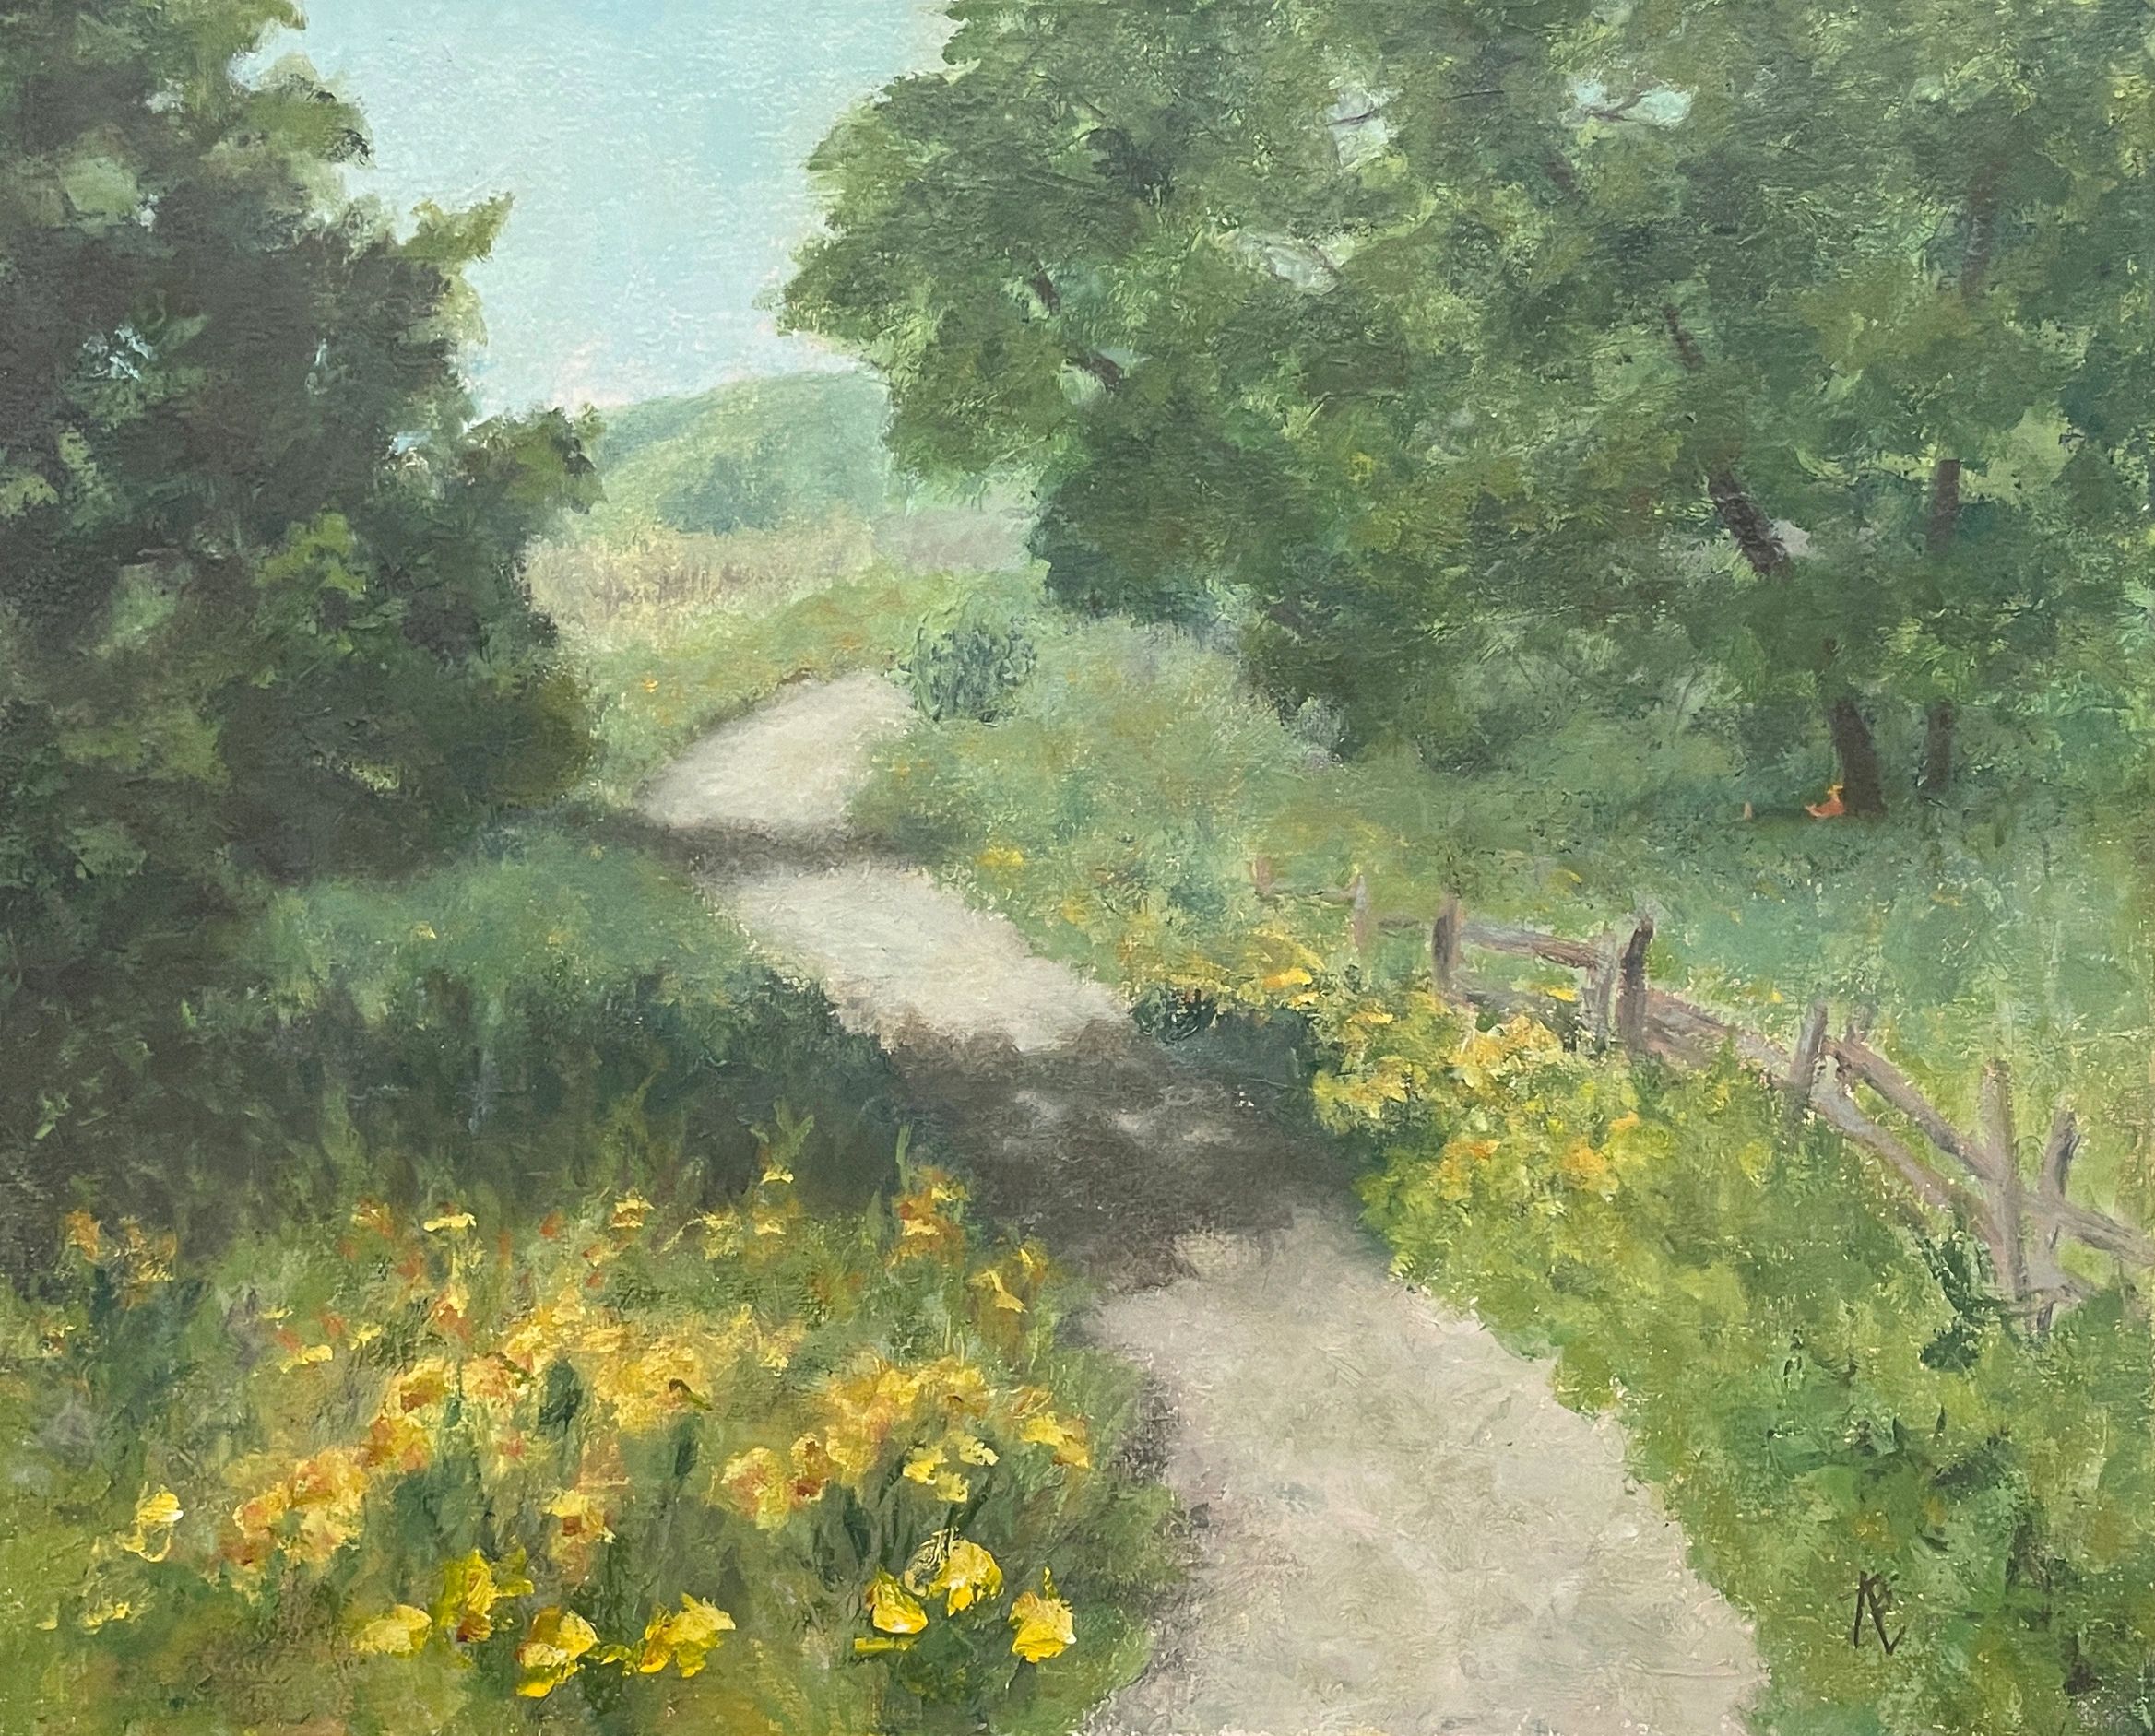 The trail is lined with yellow flowers, trees, a sleeping person in the shade, and a fence.